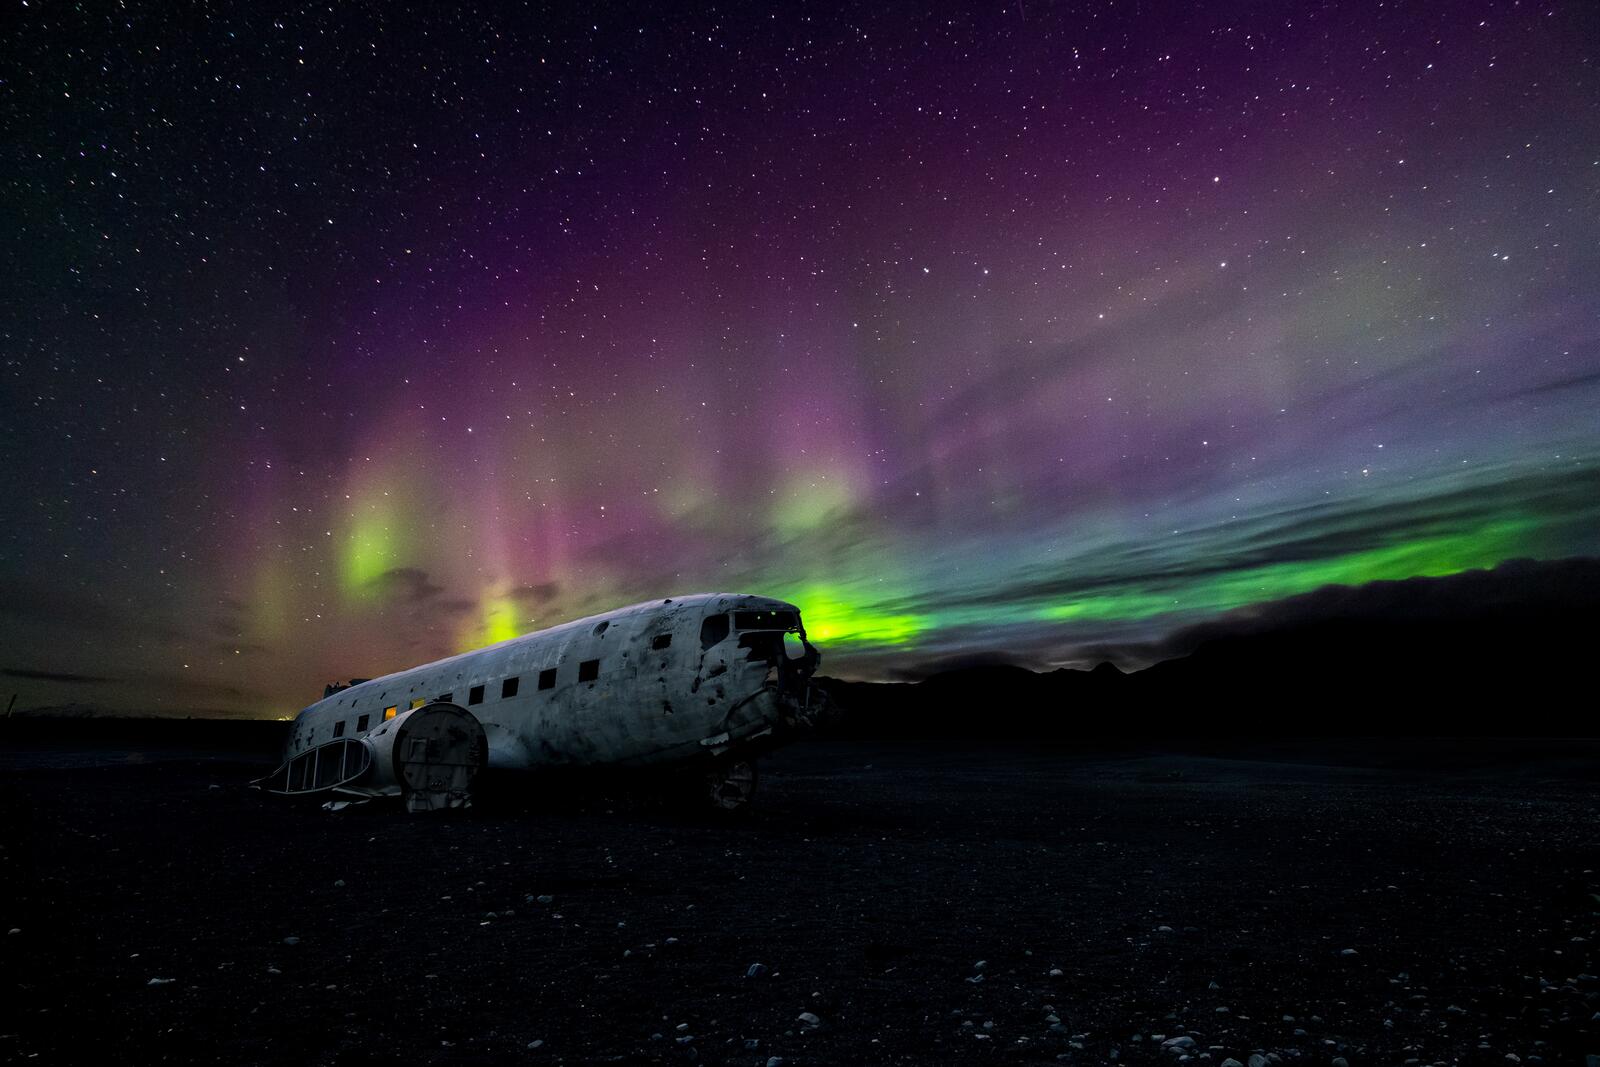 Free photo A wrecked airplane against the night sky with northern lights